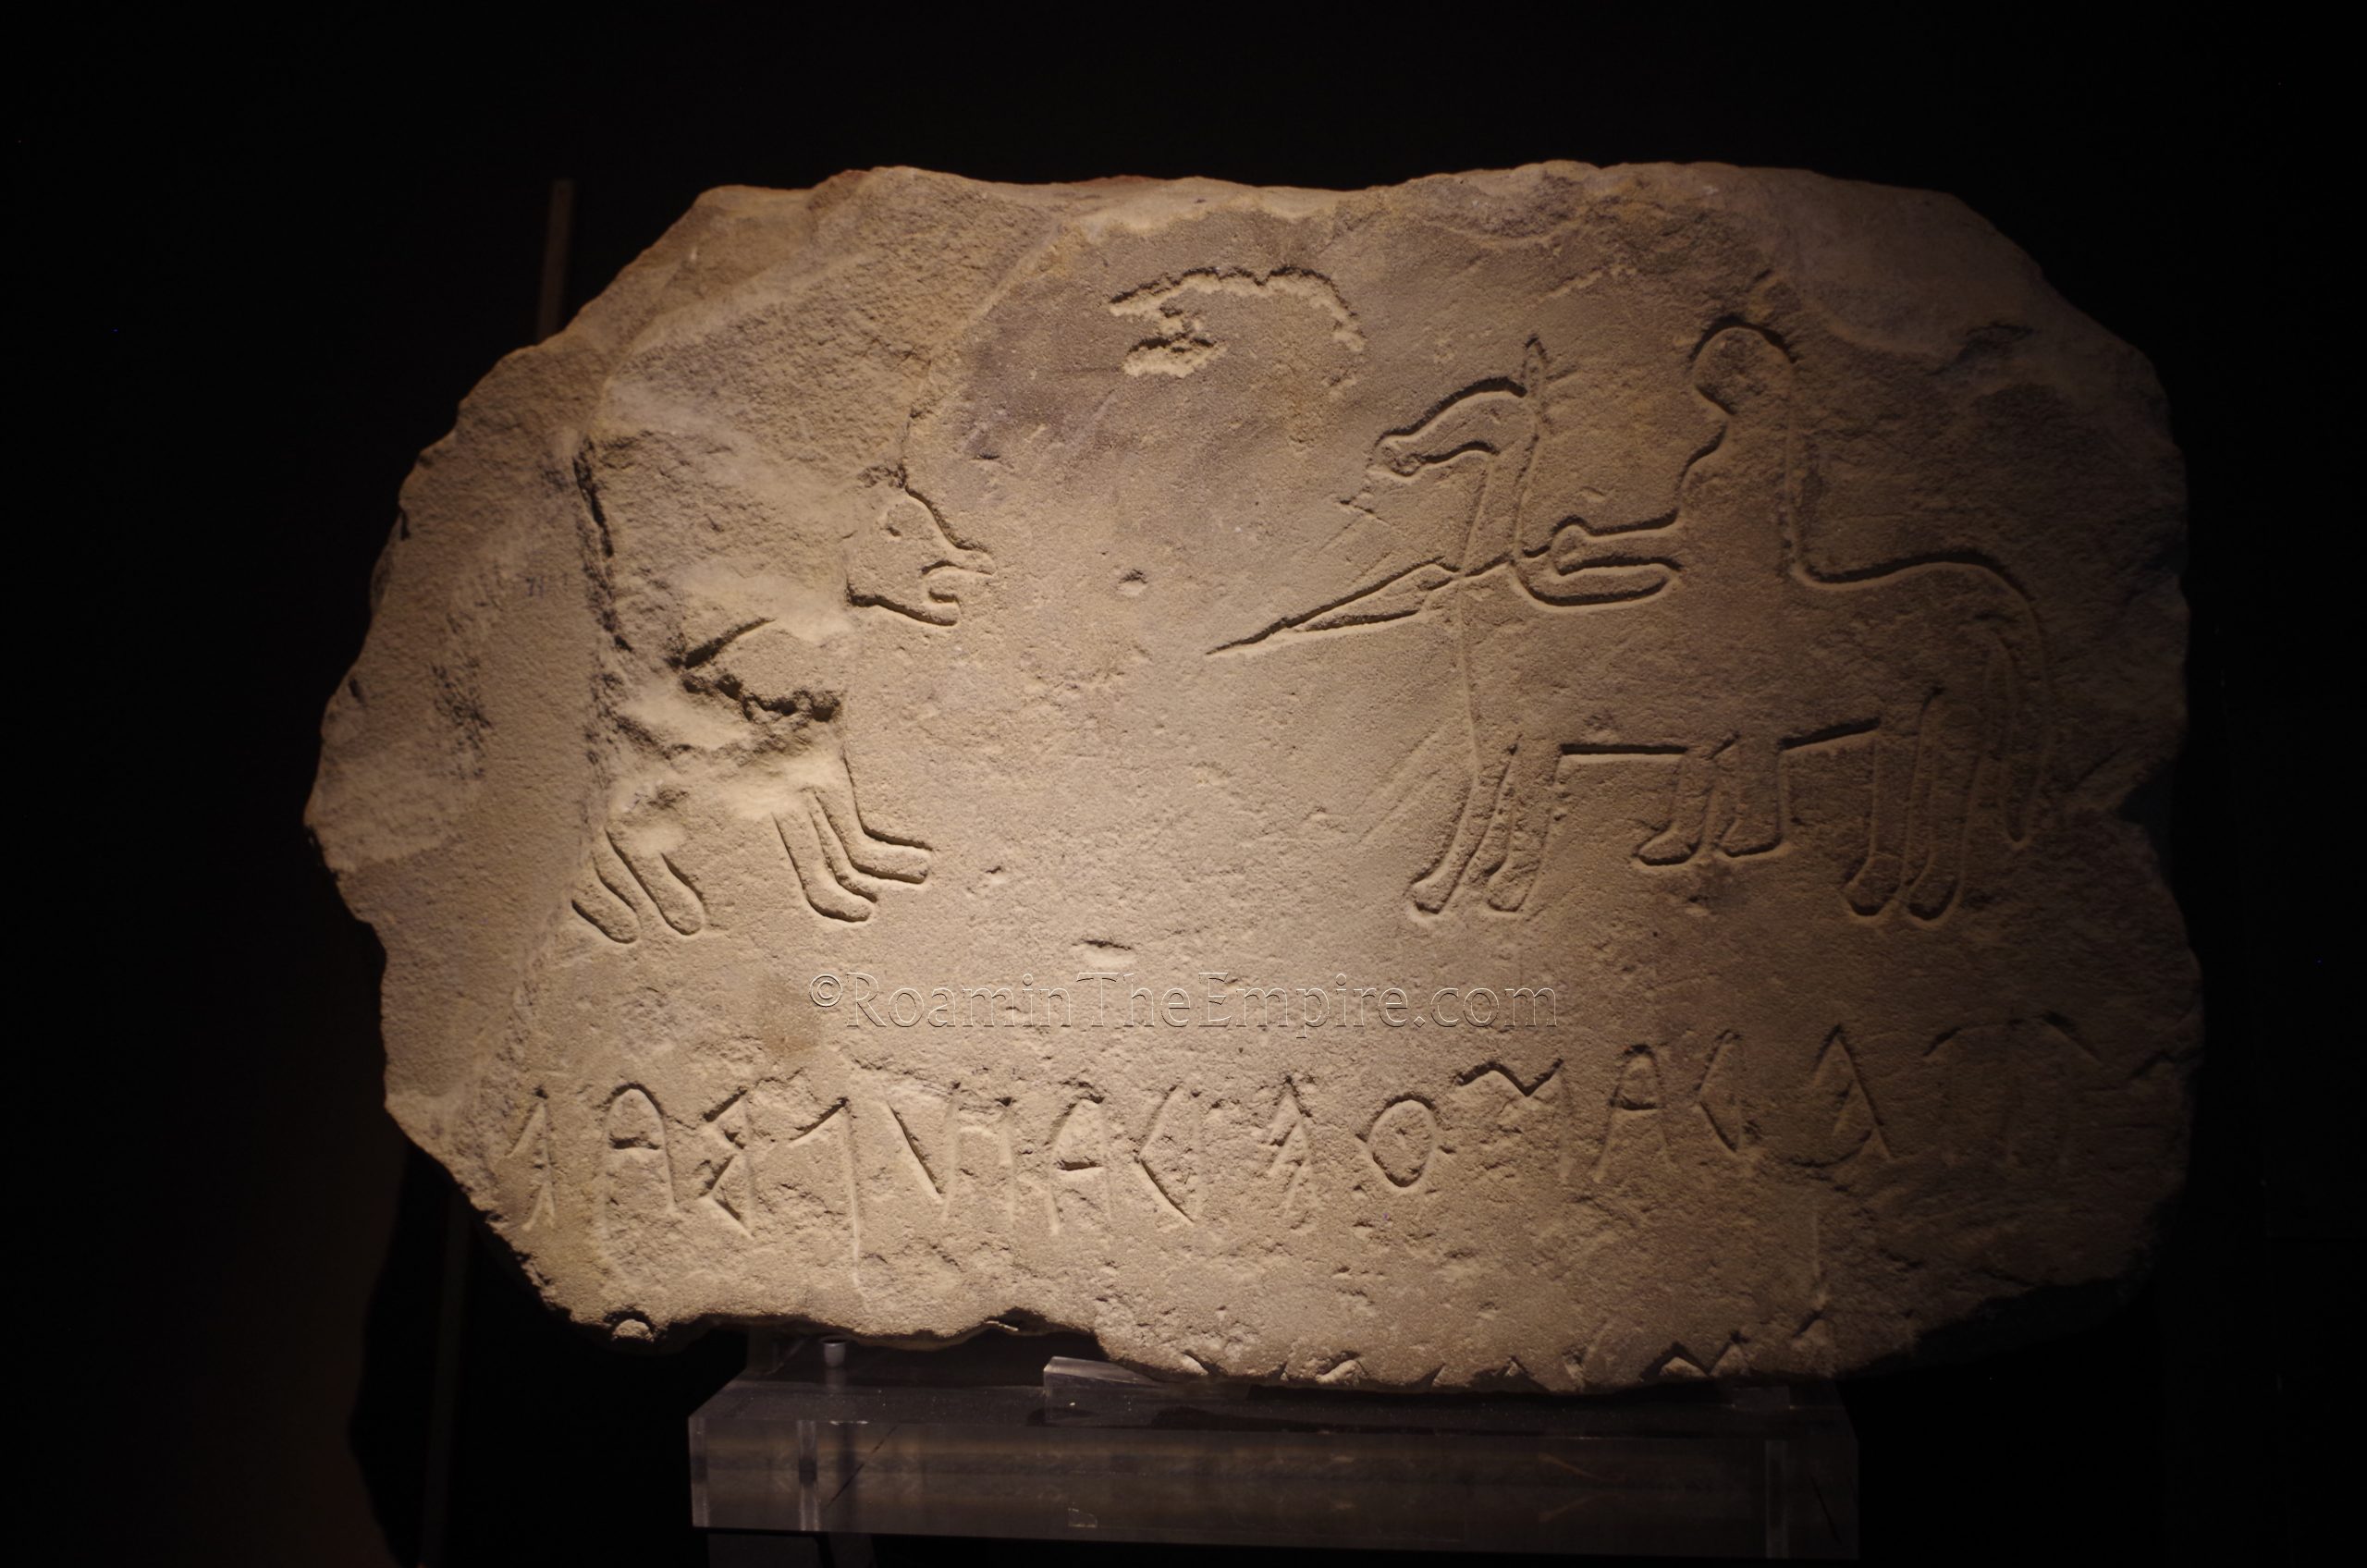 Picene stele with image of a hunter and untranslated text. From Novilara. Museo Archeologico Nazionale delle Marche.